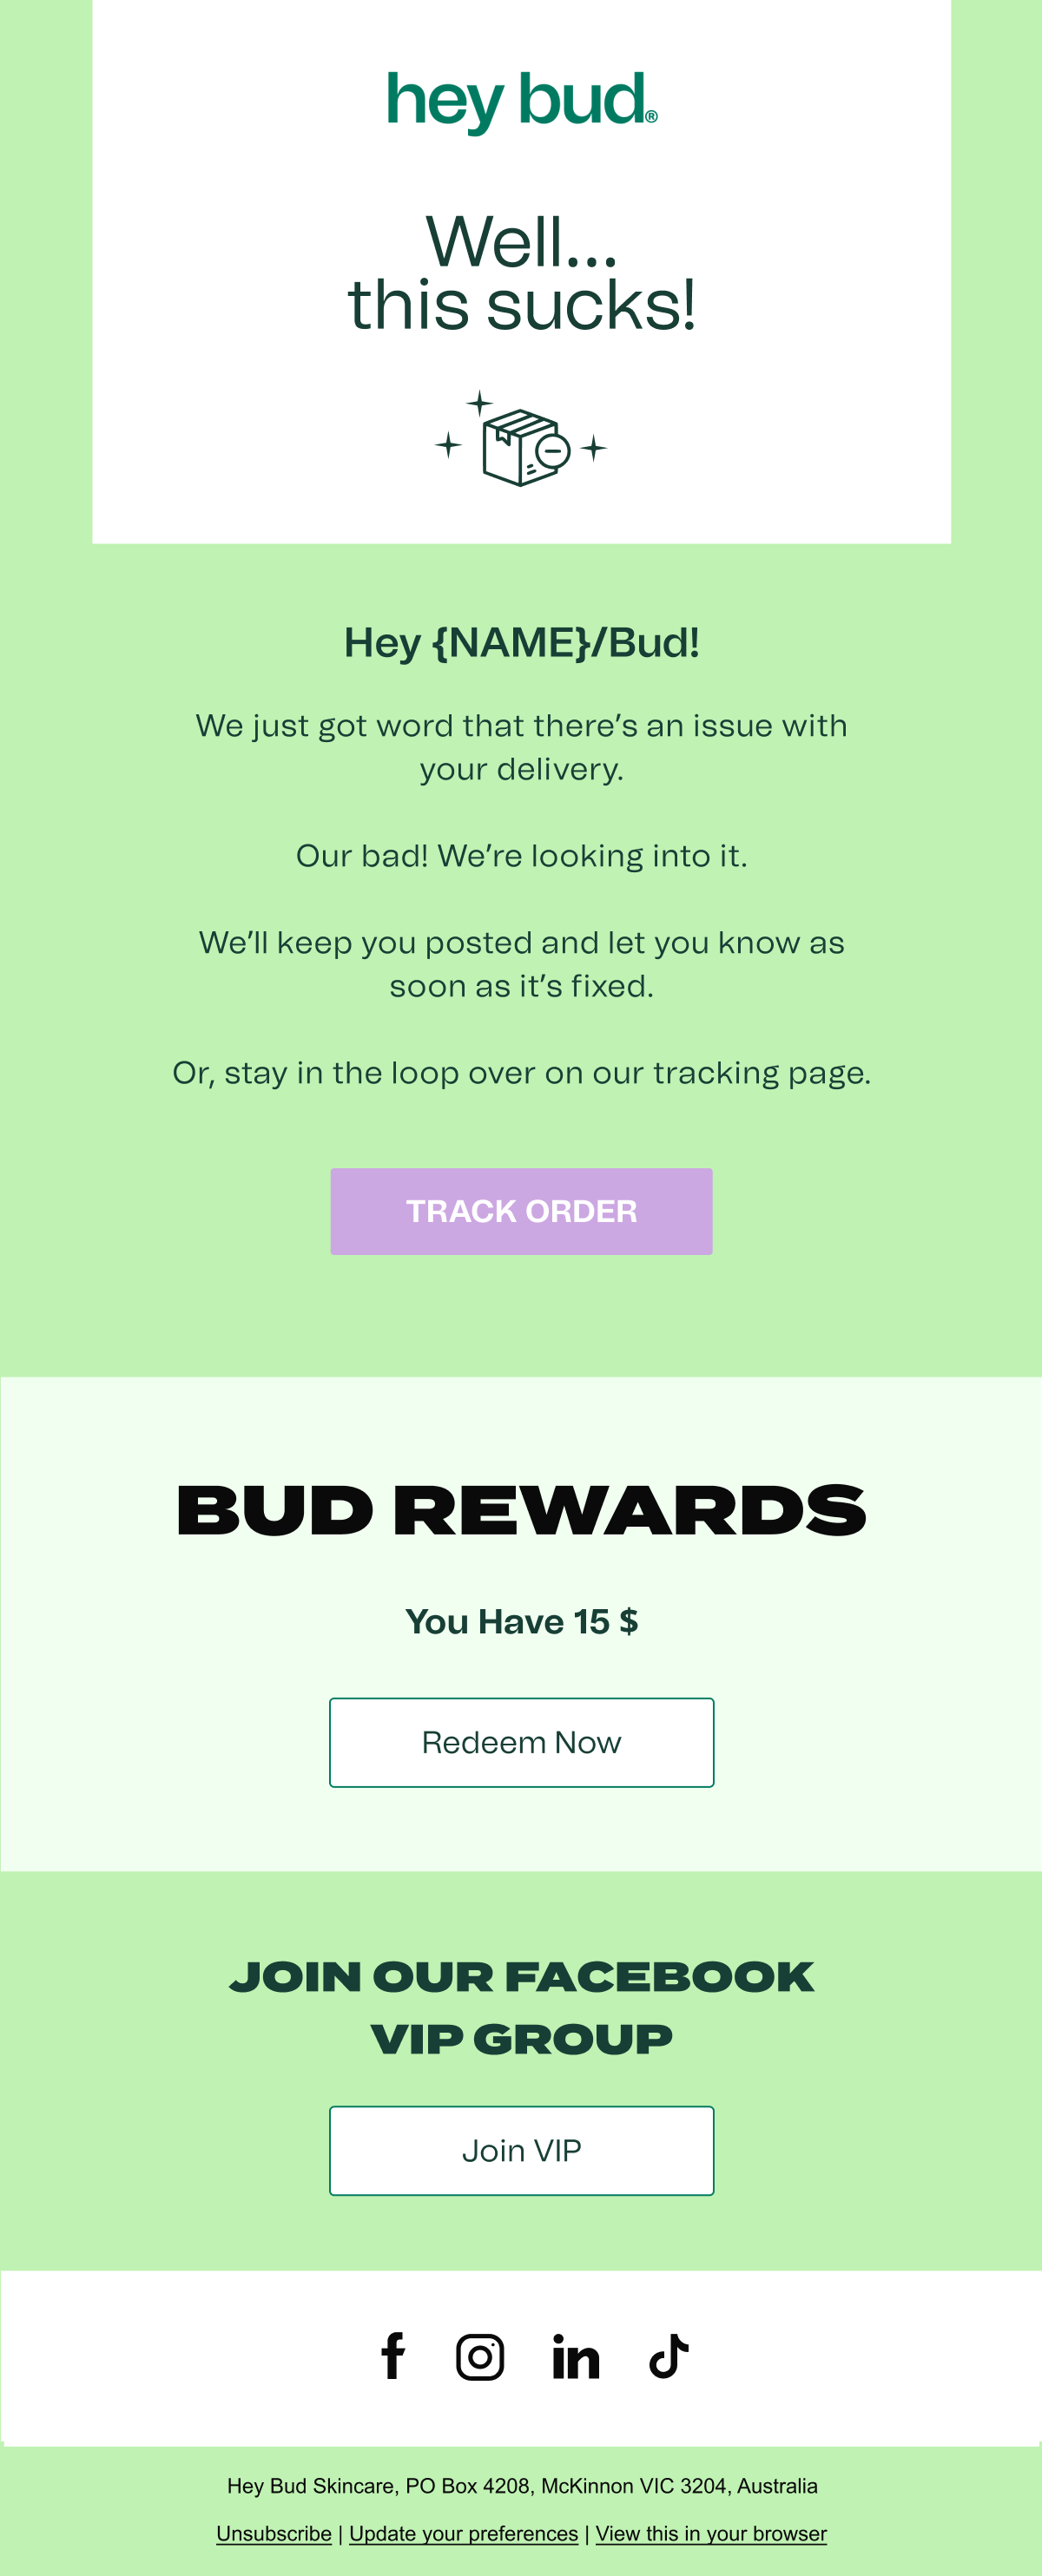 Hey Bud Other Delivery Issues Cosmetics and Beauty Email Template 